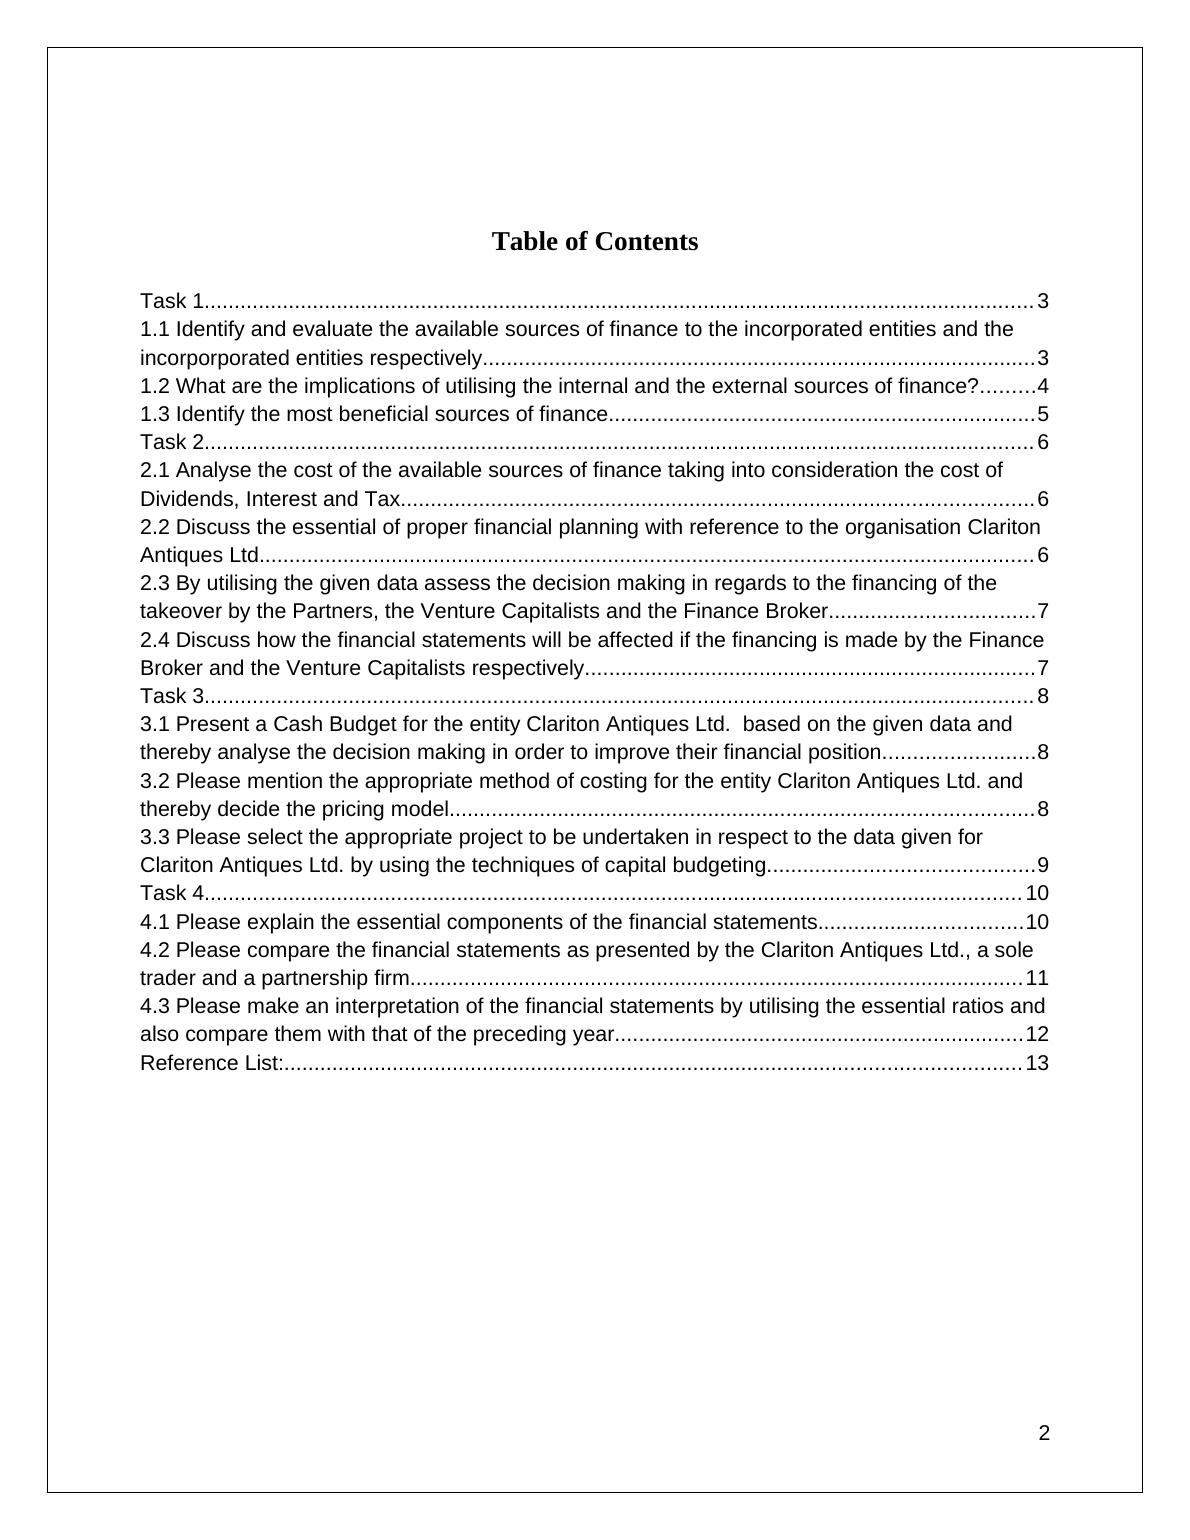 (Solved) Sources of Finance - PDF_2